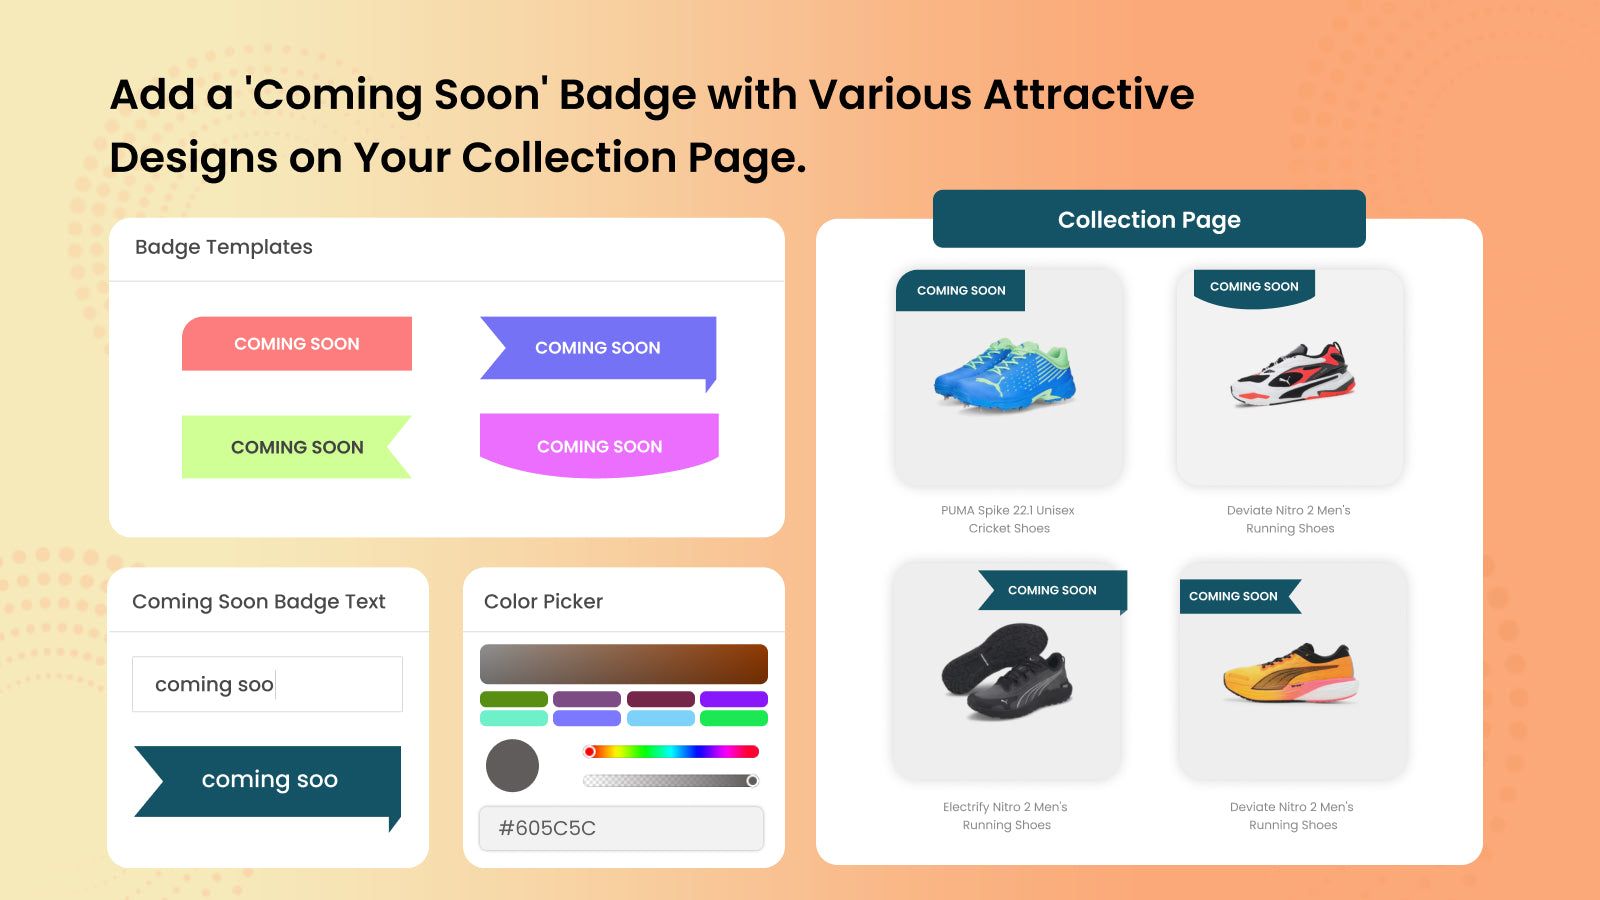 Add 'Coming Soon' Badge with Various Designs on Collection Page